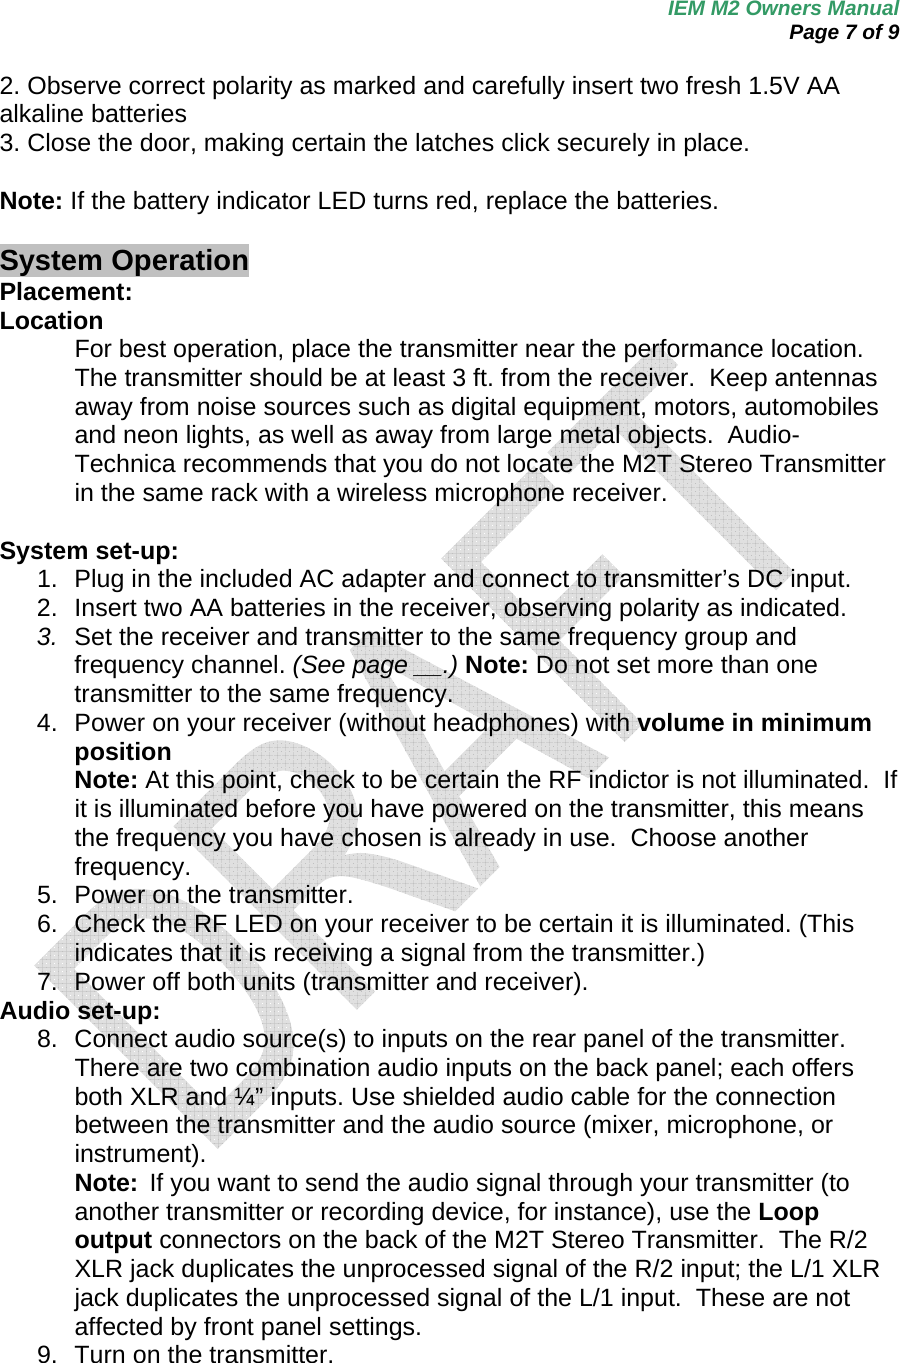 IEM M2 Owners Manual  Page 7 of 9  2. Observe correct polarity as marked and carefully insert two fresh 1.5V AA alkaline batteries 3. Close the door, making certain the latches click securely in place.  Note: If the battery indicator LED turns red, replace the batteries.  System Operation Placement: Location For best operation, place the transmitter near the performance location.  The transmitter should be at least 3 ft. from the receiver.  Keep antennas away from noise sources such as digital equipment, motors, automobiles and neon lights, as well as away from large metal objects.  Audio-Technica recommends that you do not locate the M2T Stereo Transmitter in the same rack with a wireless microphone receiver.  System set-up: 1.  Plug in the included AC adapter and connect to transmitter’s DC input. 2.  Insert two AA batteries in the receiver, observing polarity as indicated. 3.  Set the receiver and transmitter to the same frequency group and frequency channel. (See page __.) Note: Do not set more than one transmitter to the same frequency. 4.  Power on your receiver (without headphones) with volume in minimum position Note: At this point, check to be certain the RF indictor is not illuminated.  If it is illuminated before you have powered on the transmitter, this means the frequency you have chosen is already in use.  Choose another frequency. 5.  Power on the transmitter. 6.  Check the RF LED on your receiver to be certain it is illuminated. (This indicates that it is receiving a signal from the transmitter.) 7.  Power off both units (transmitter and receiver). Audio set-up: 8.  Connect audio source(s) to inputs on the rear panel of the transmitter. There are two combination audio inputs on the back panel; each offers both XLR and ¼” inputs. Use shielded audio cable for the connection between the transmitter and the audio source (mixer, microphone, or instrument).   Note:  If you want to send the audio signal through your transmitter (to another transmitter or recording device, for instance), use the Loop output connectors on the back of the M2T Stereo Transmitter.  The R/2 XLR jack duplicates the unprocessed signal of the R/2 input; the L/1 XLR jack duplicates the unprocessed signal of the L/1 input.  These are not affected by front panel settings. 9.  Turn on the transmitter. 